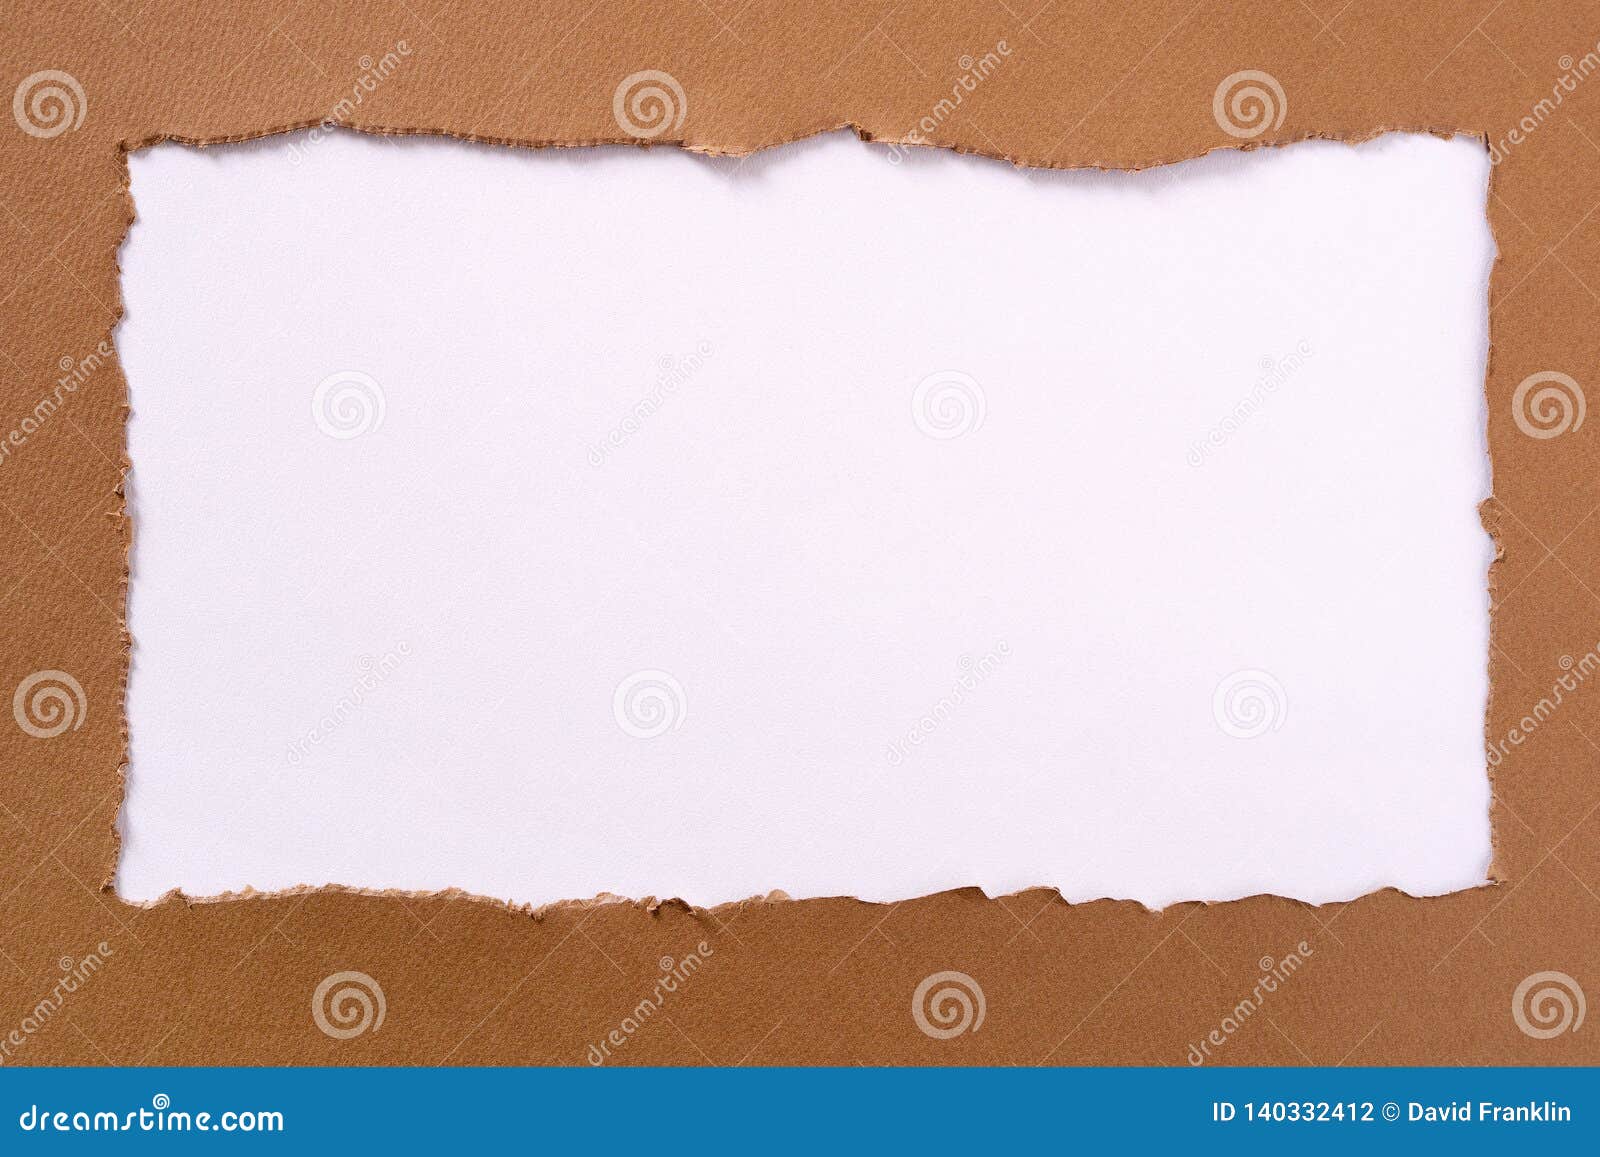 torn brown paper oblong white background border frame untidy edge